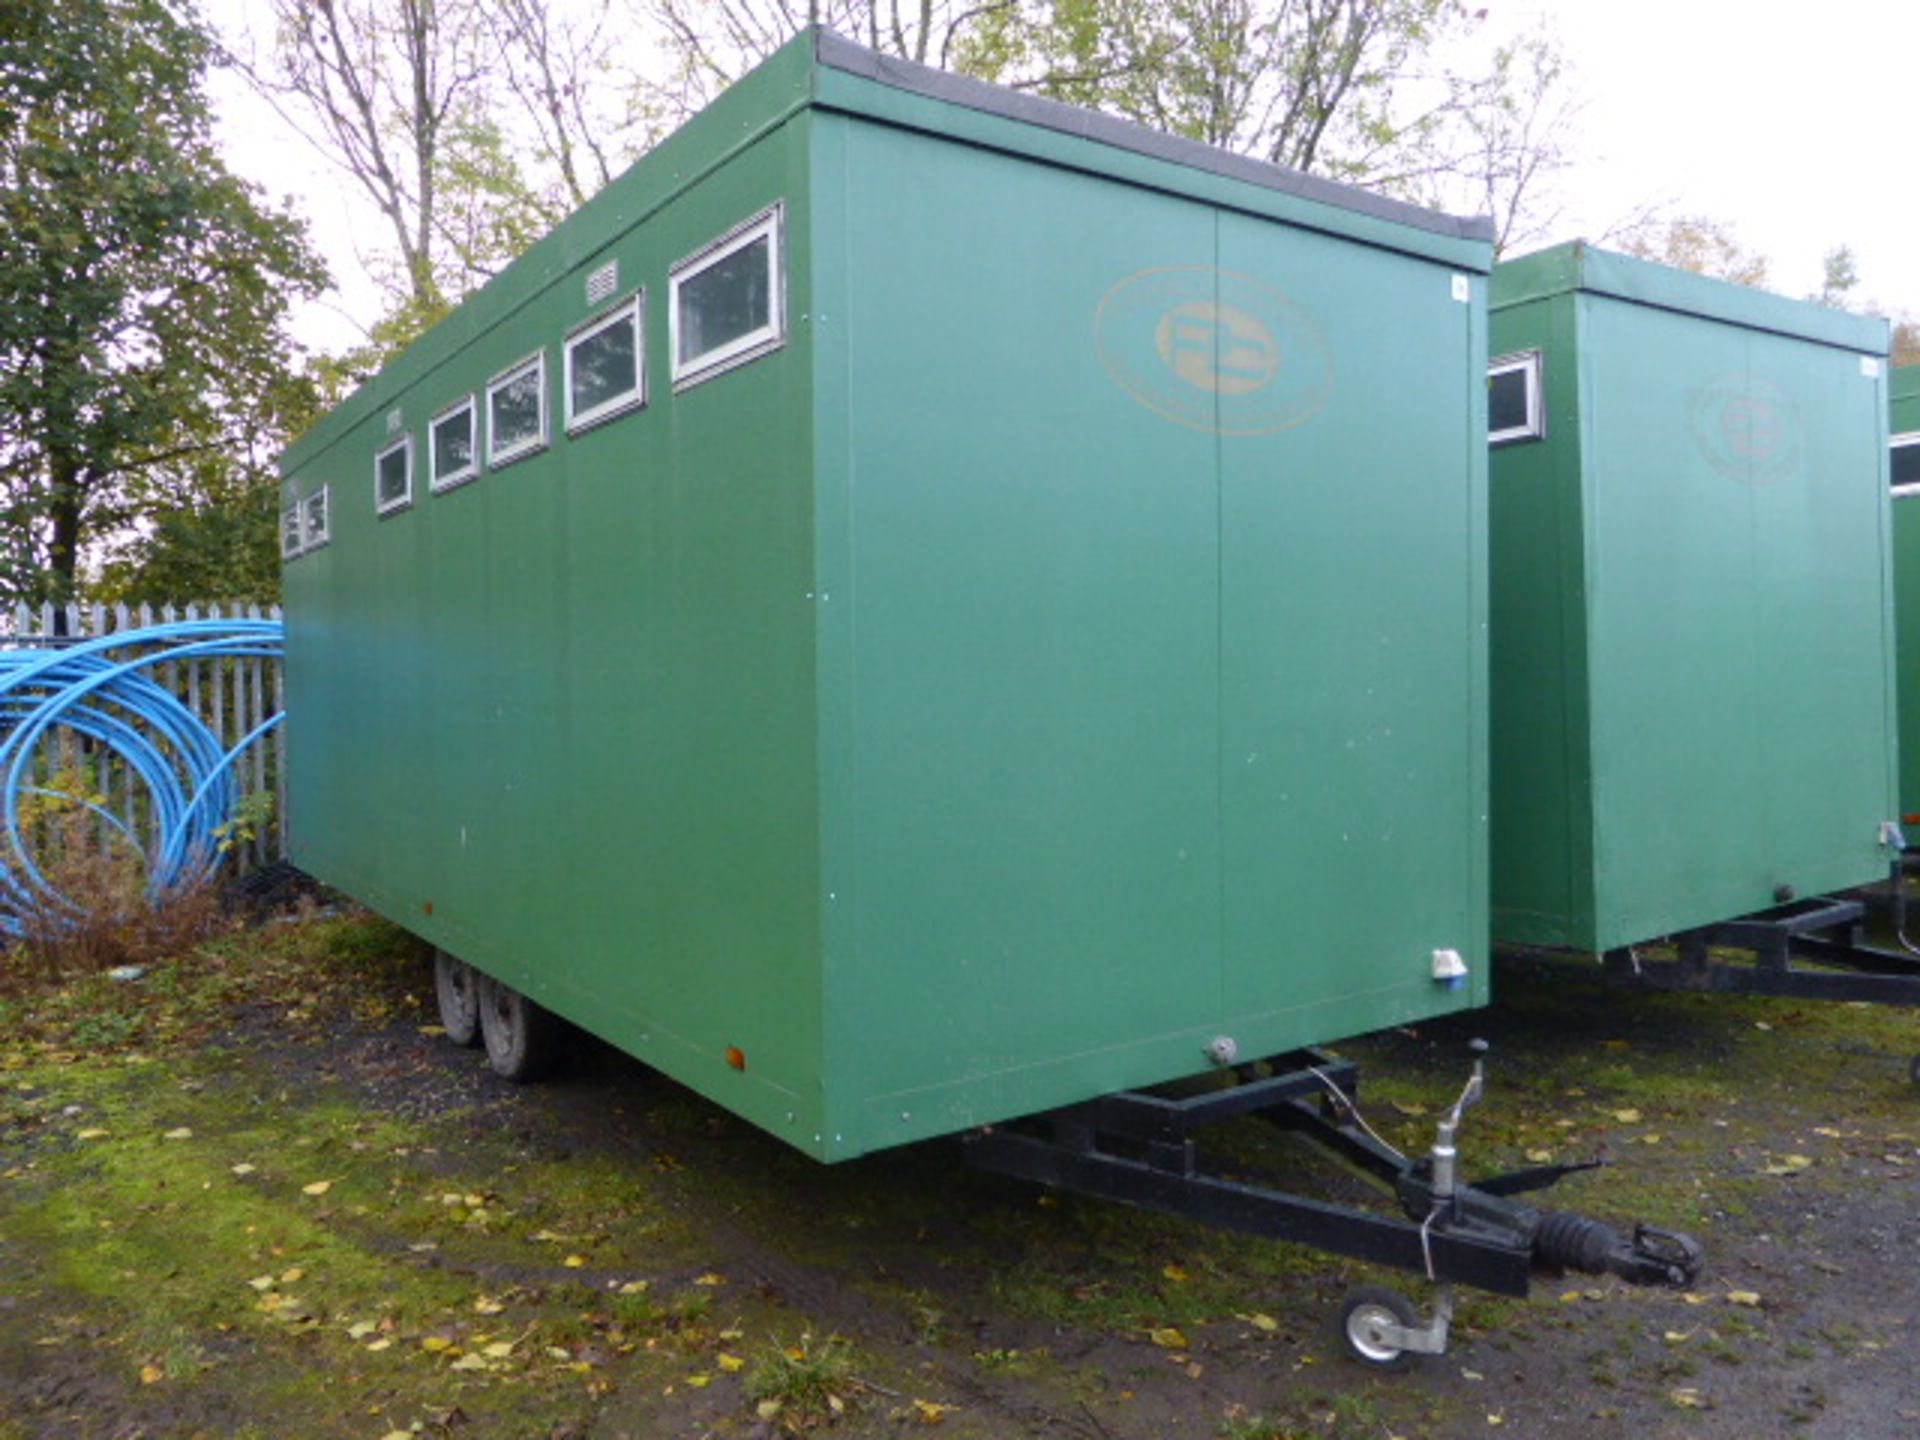 Springfield standard twin axle toilet trailer 4 + 2 + urinal toilet trailer with mains connection (